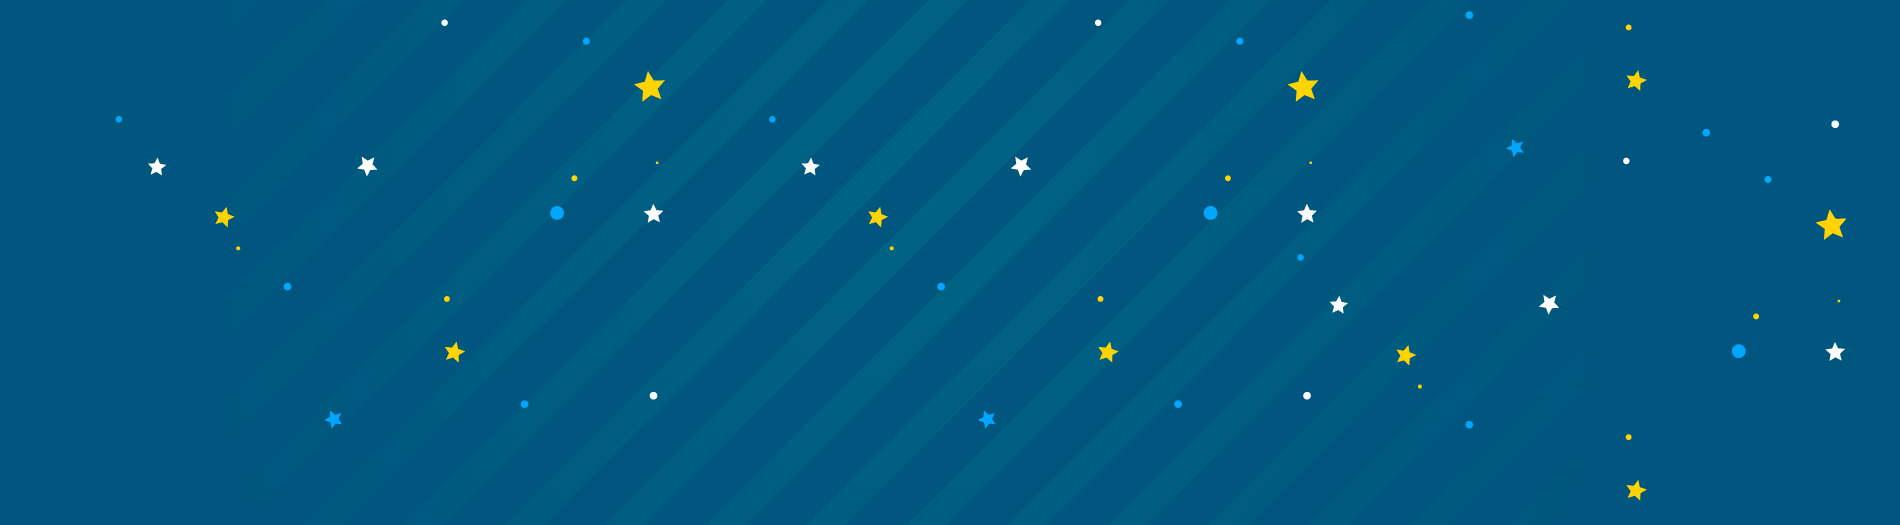 A blue color field with stars on it.